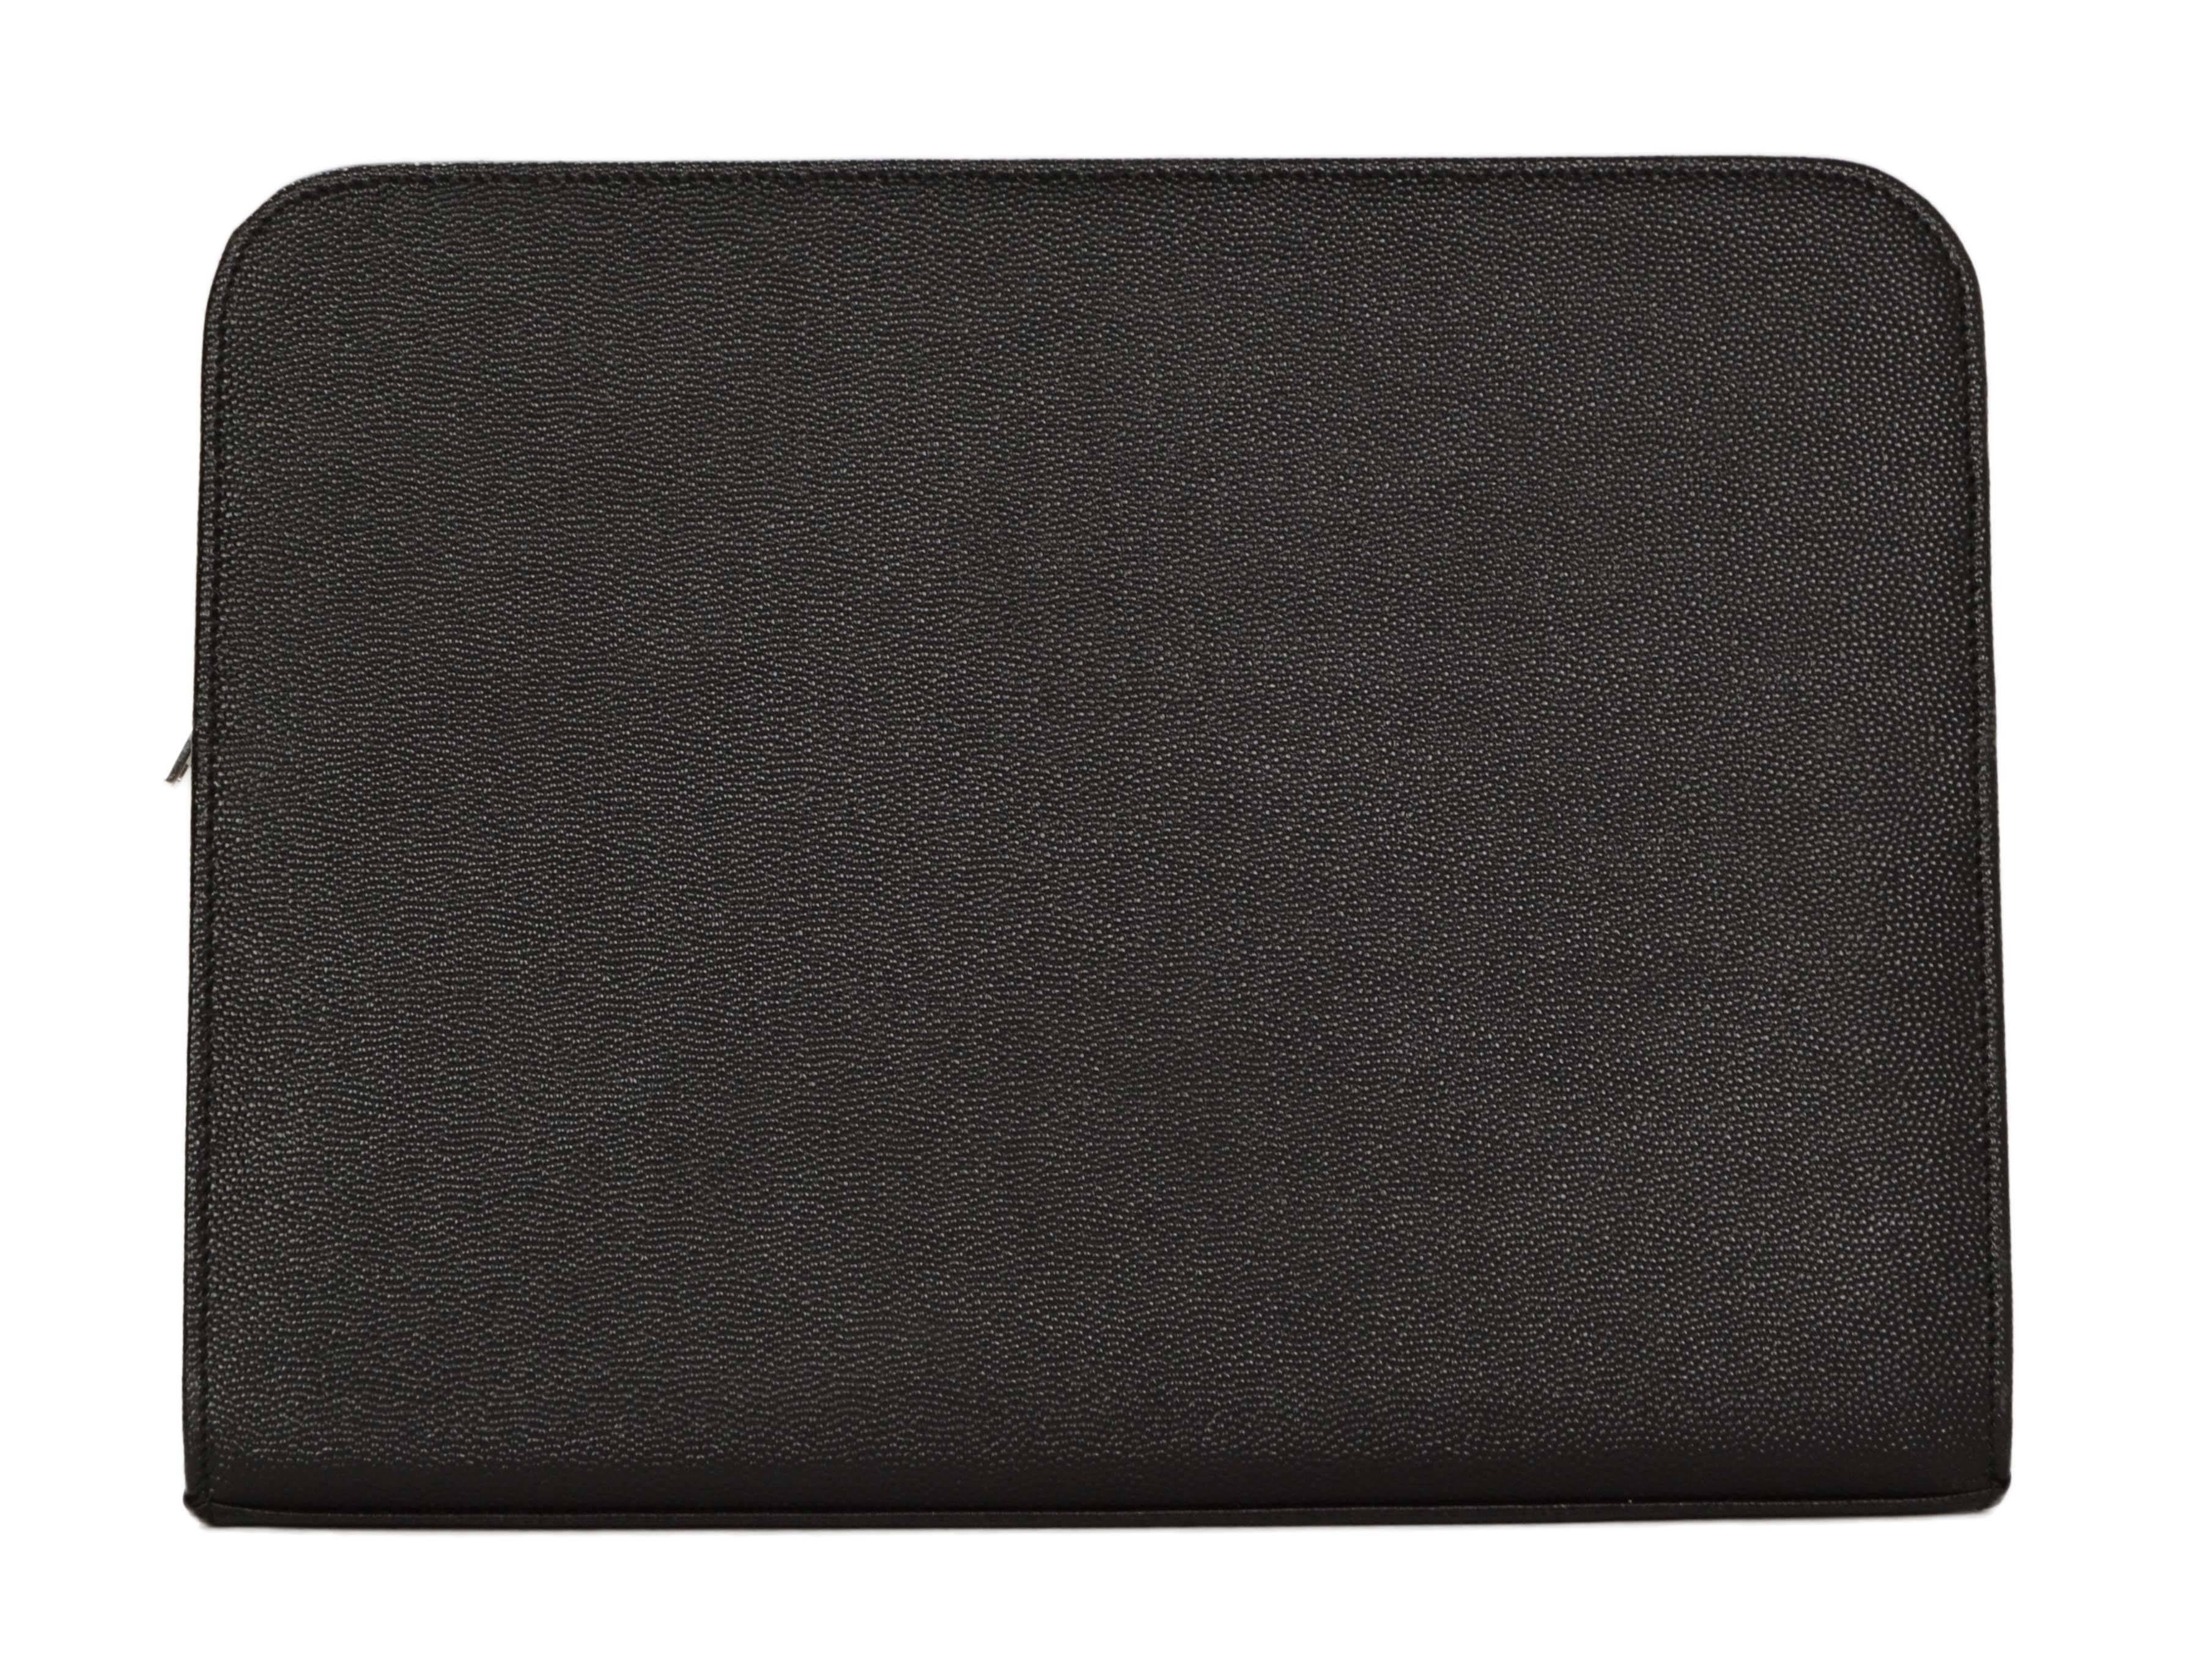 Saint Laurent Black Leather iPad Case/Clutch Bag rt $560 In Excellent Condition In New York, NY